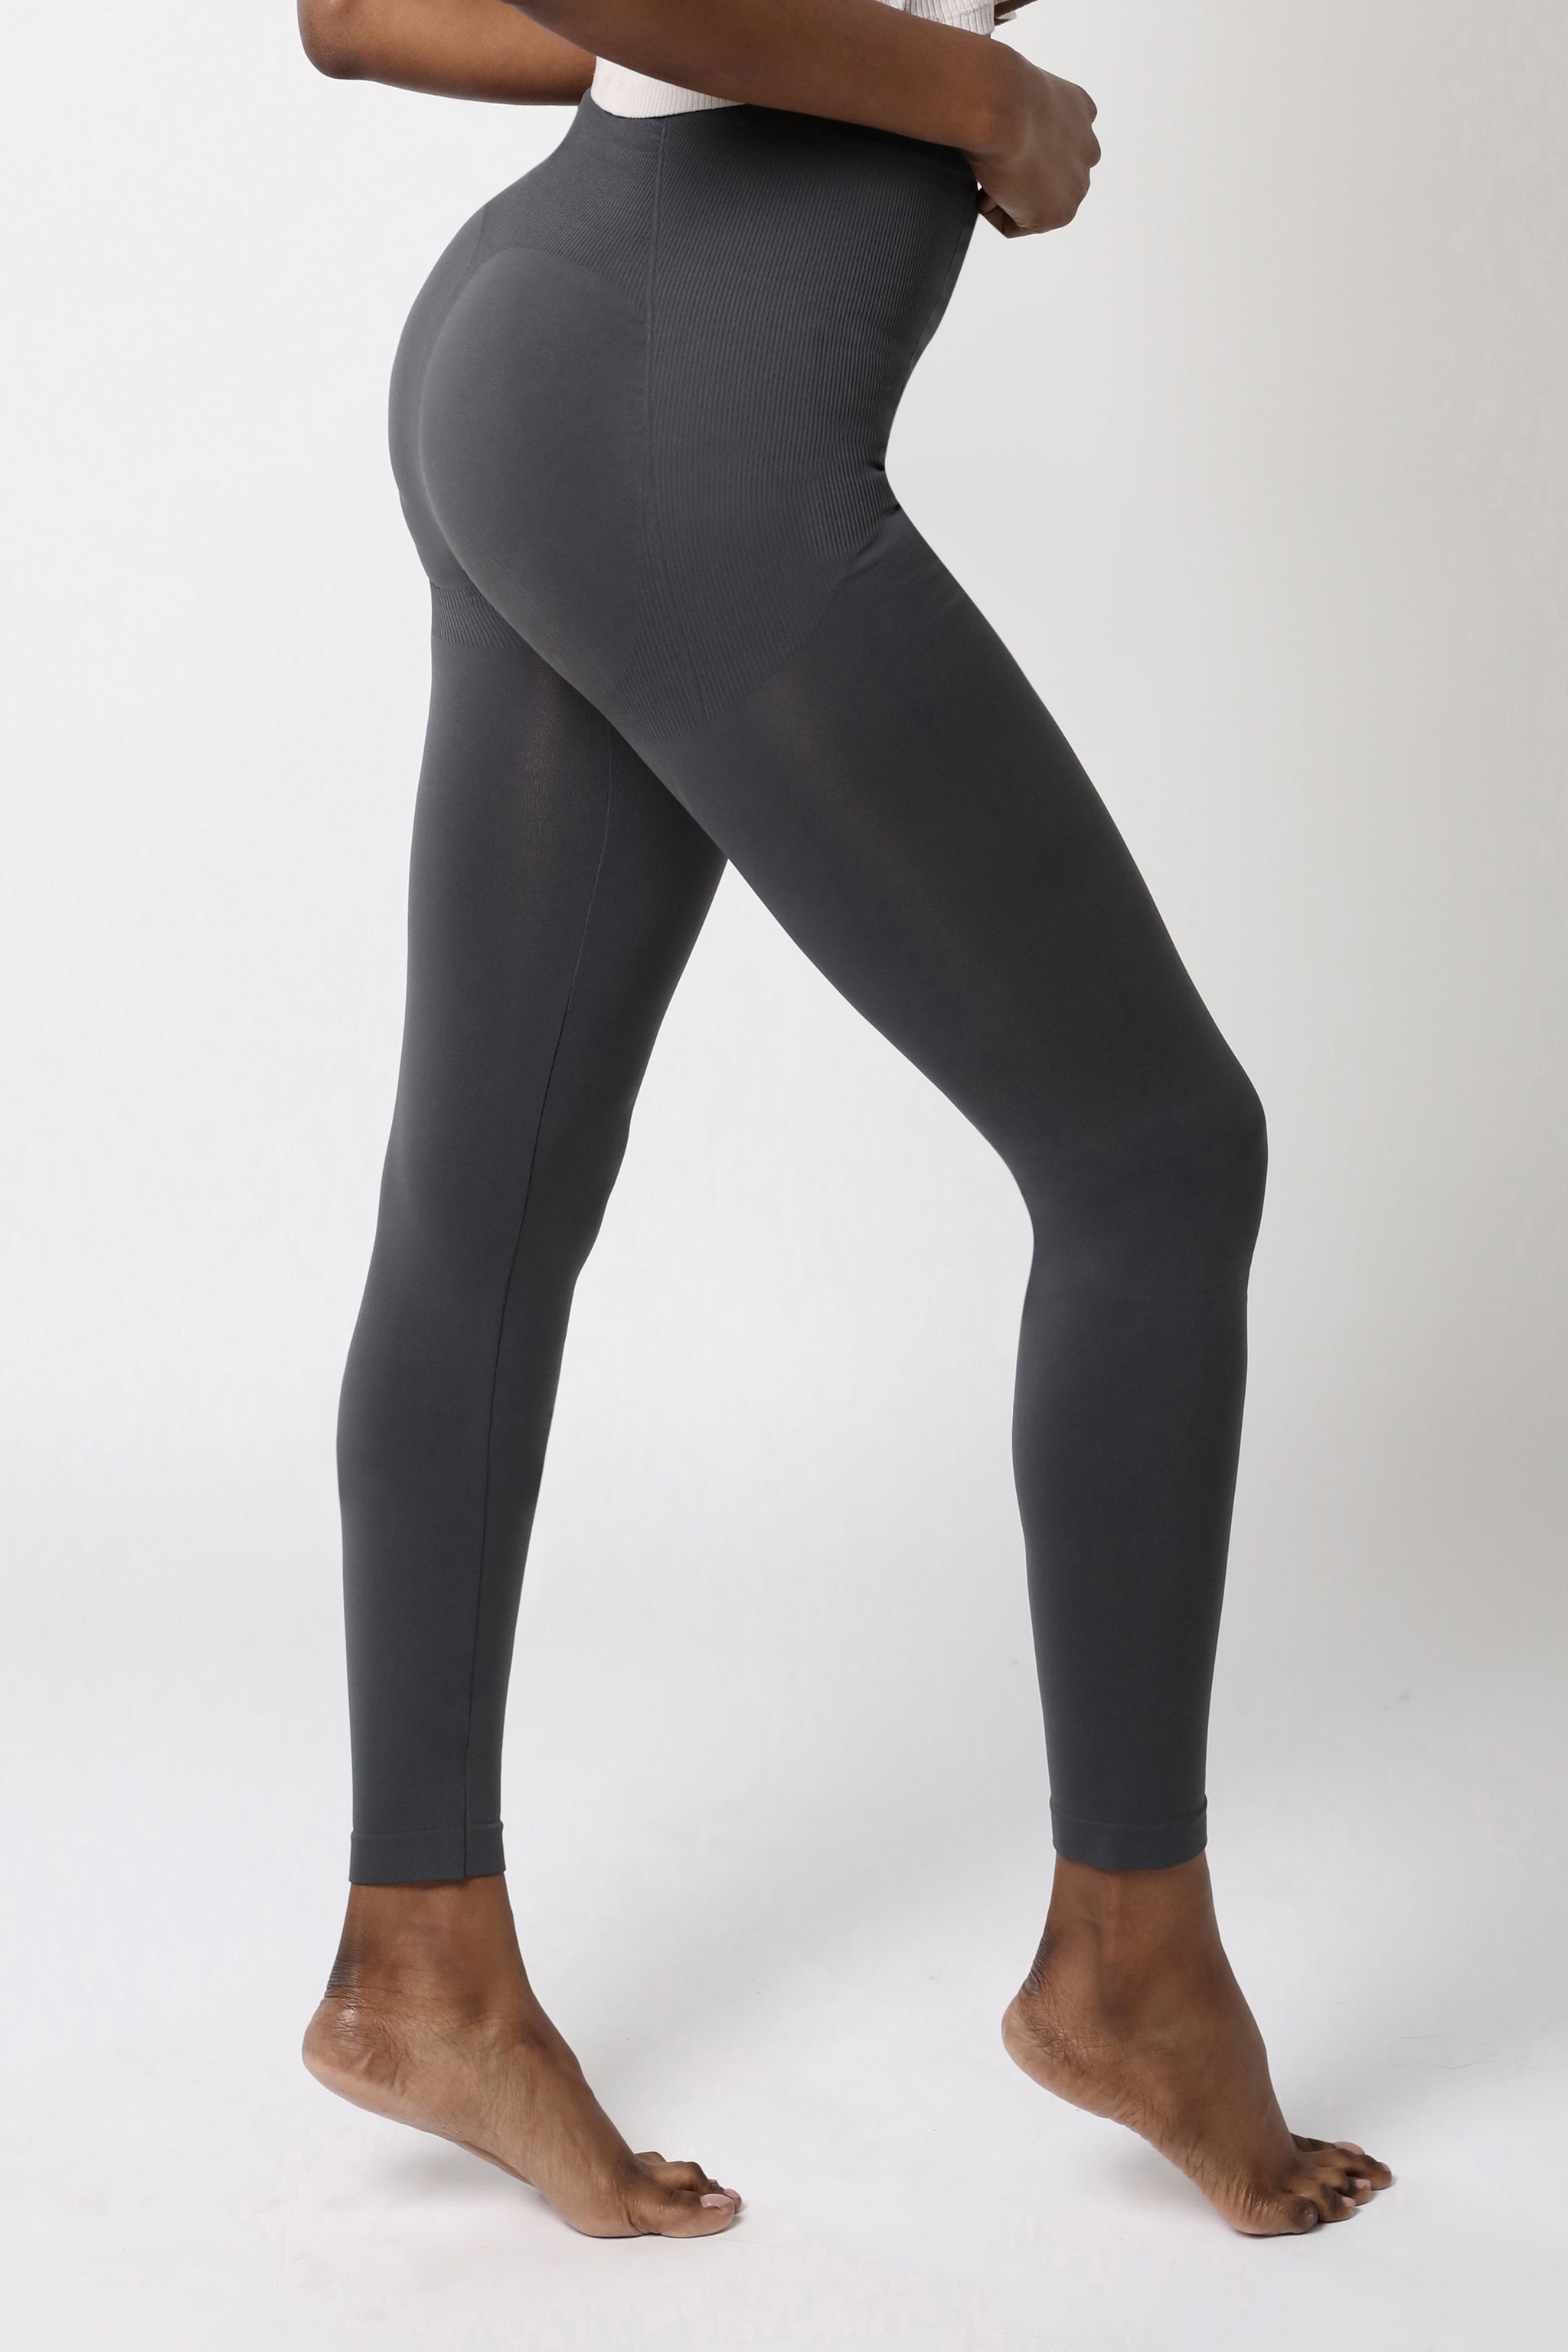 side view of legging for women - Charcoal grey